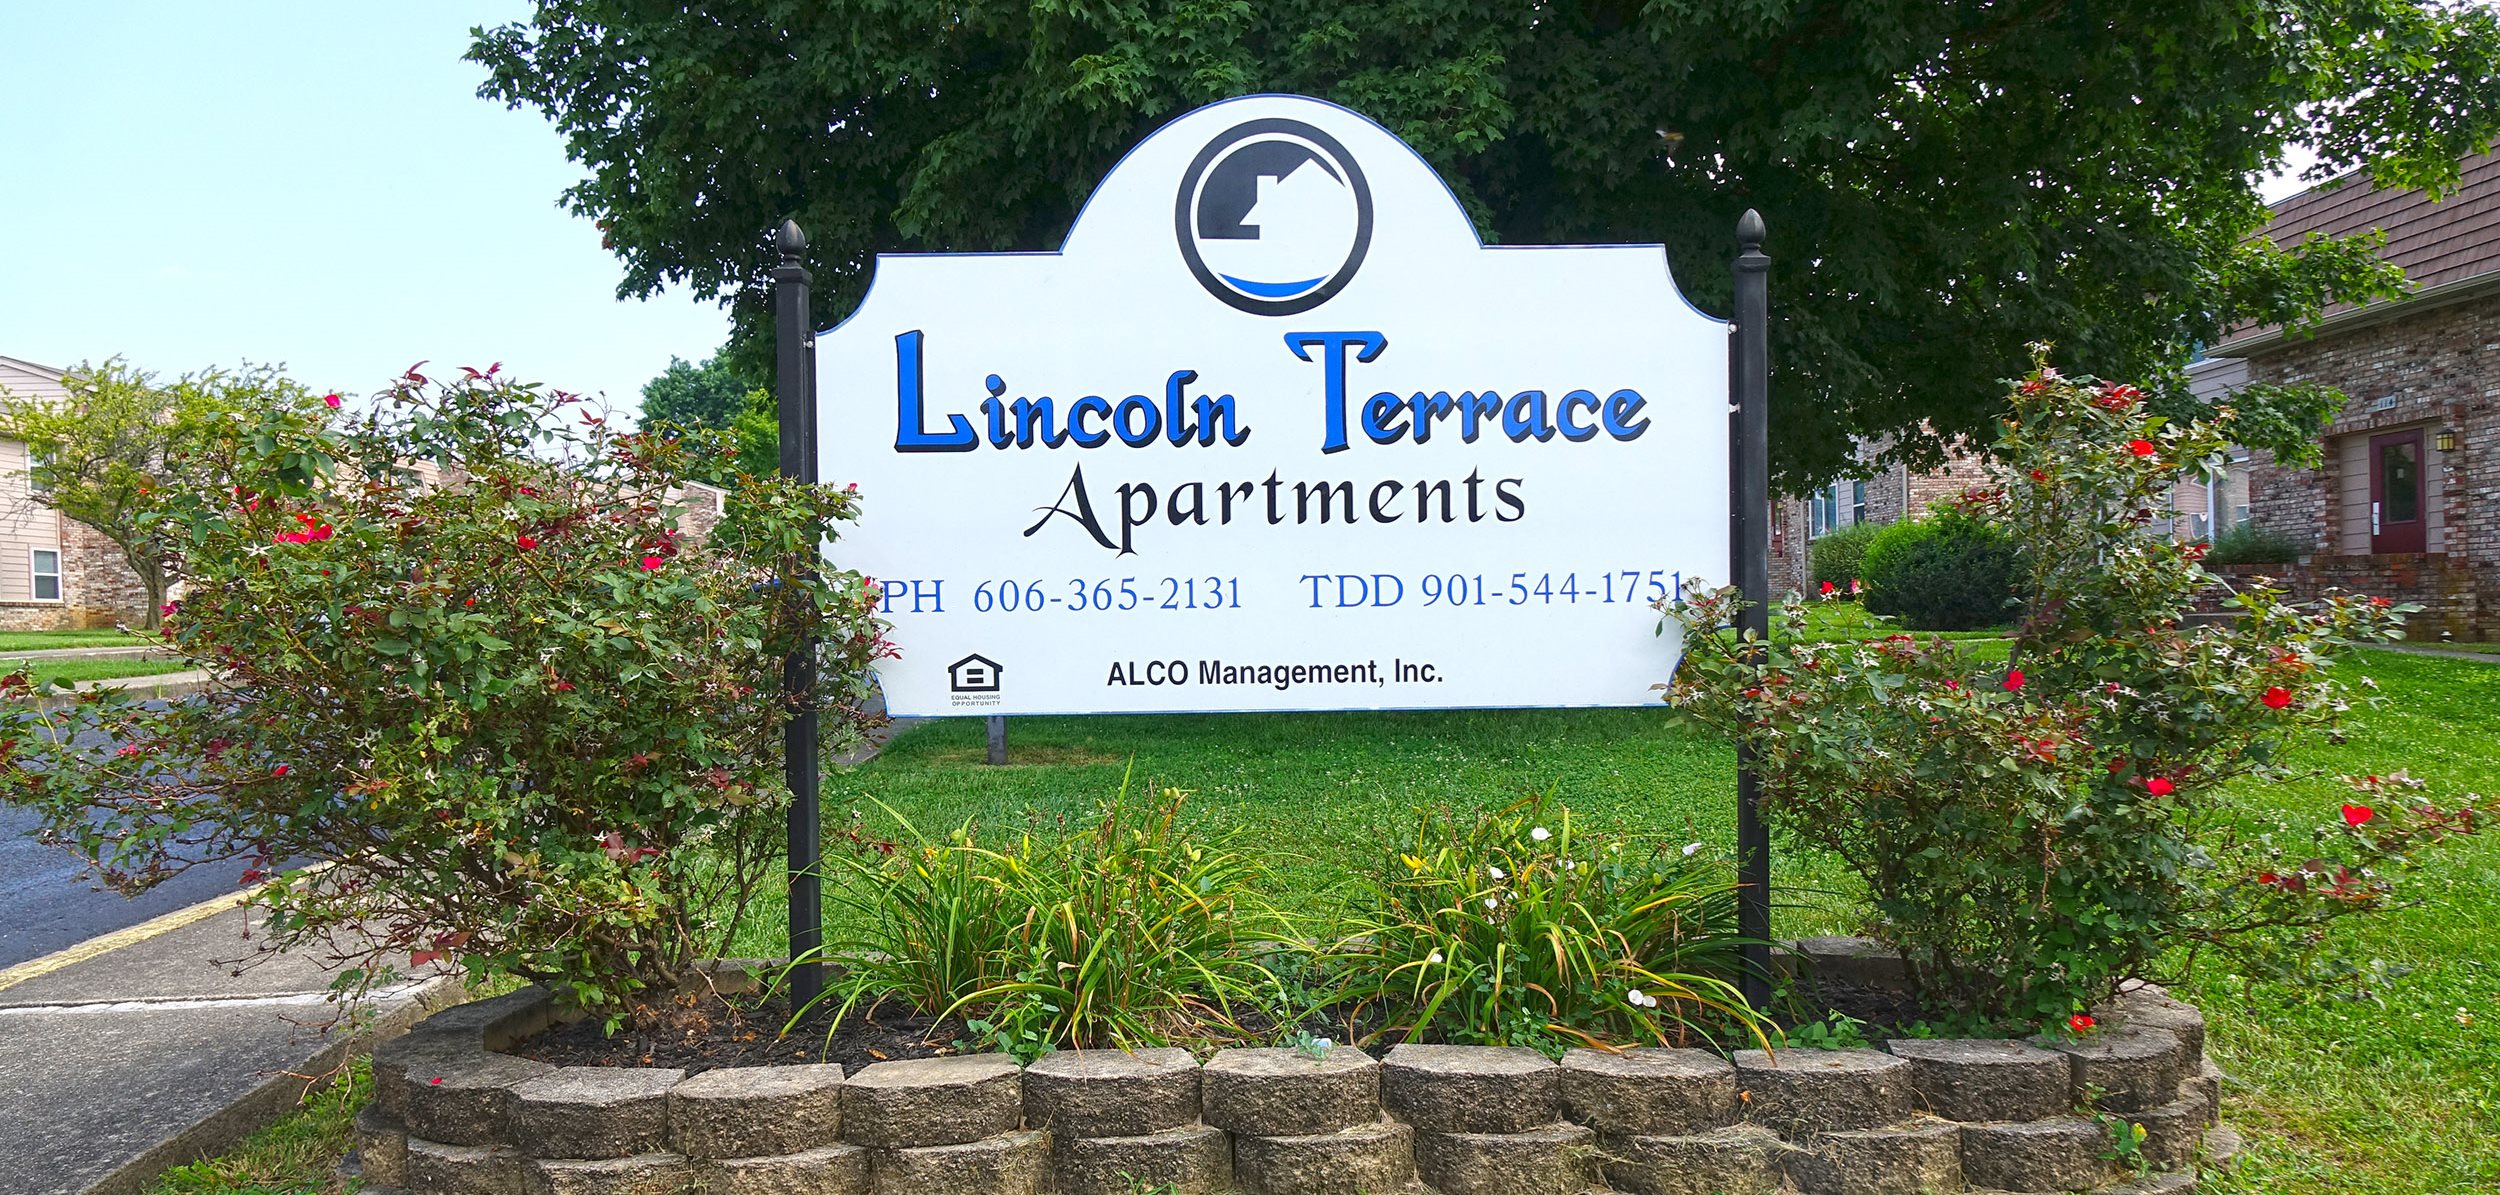 Lincoln Terrace Apartments Apartments In Stanford Ky